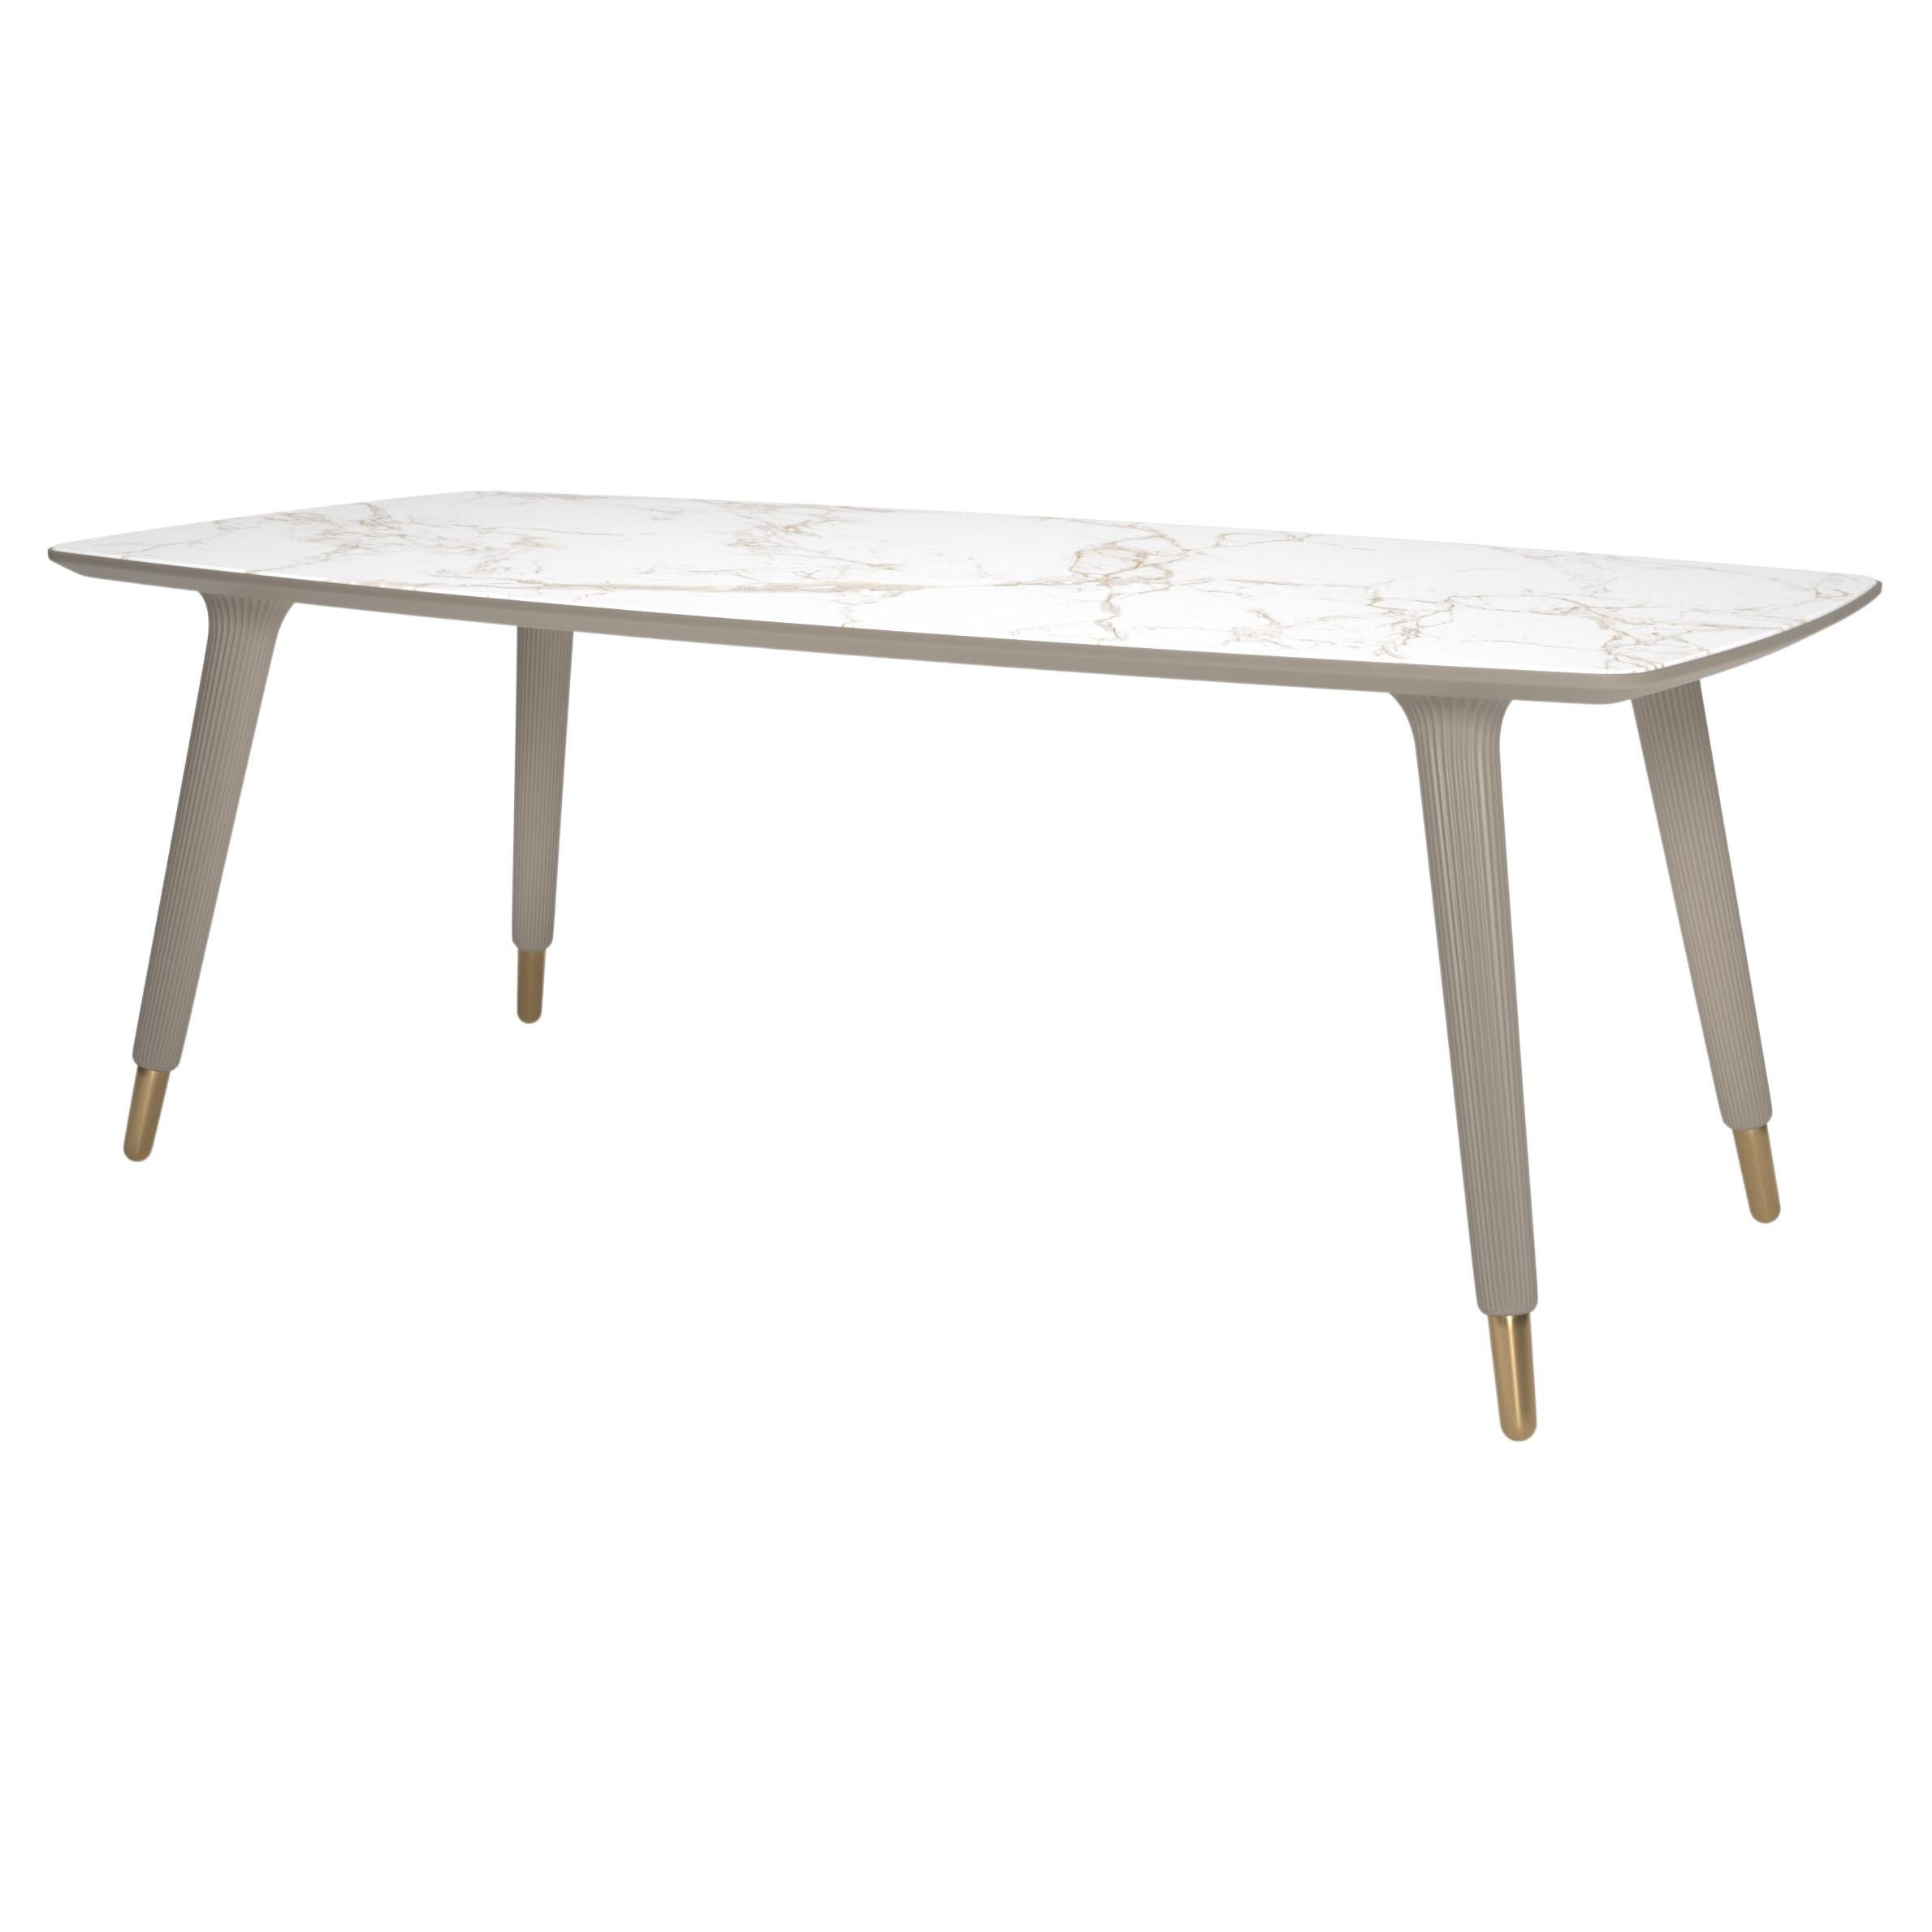 Modern Outdoor Fiberglass Dining Table For Sale